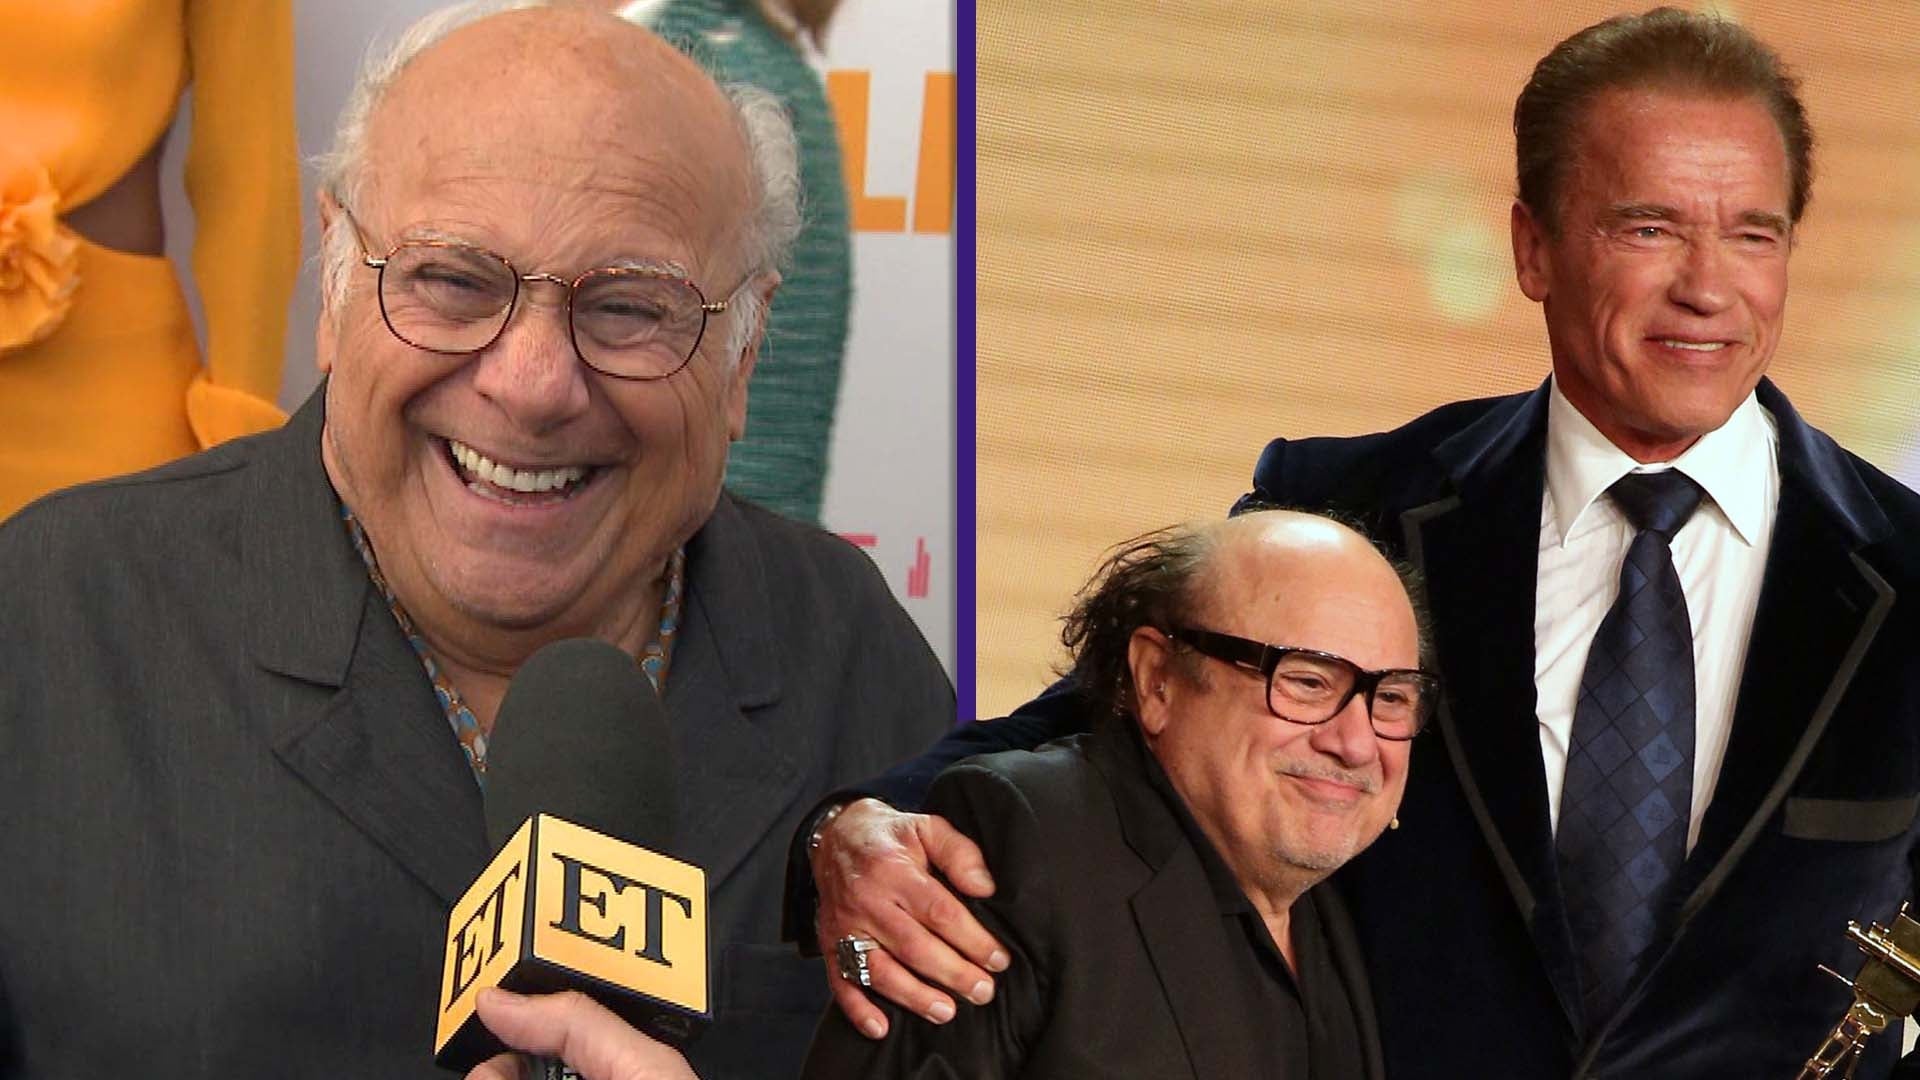 Danny DeVito Shares Update on Upcoming Film Starring Arnold Schwarzenegger (Exclusive)